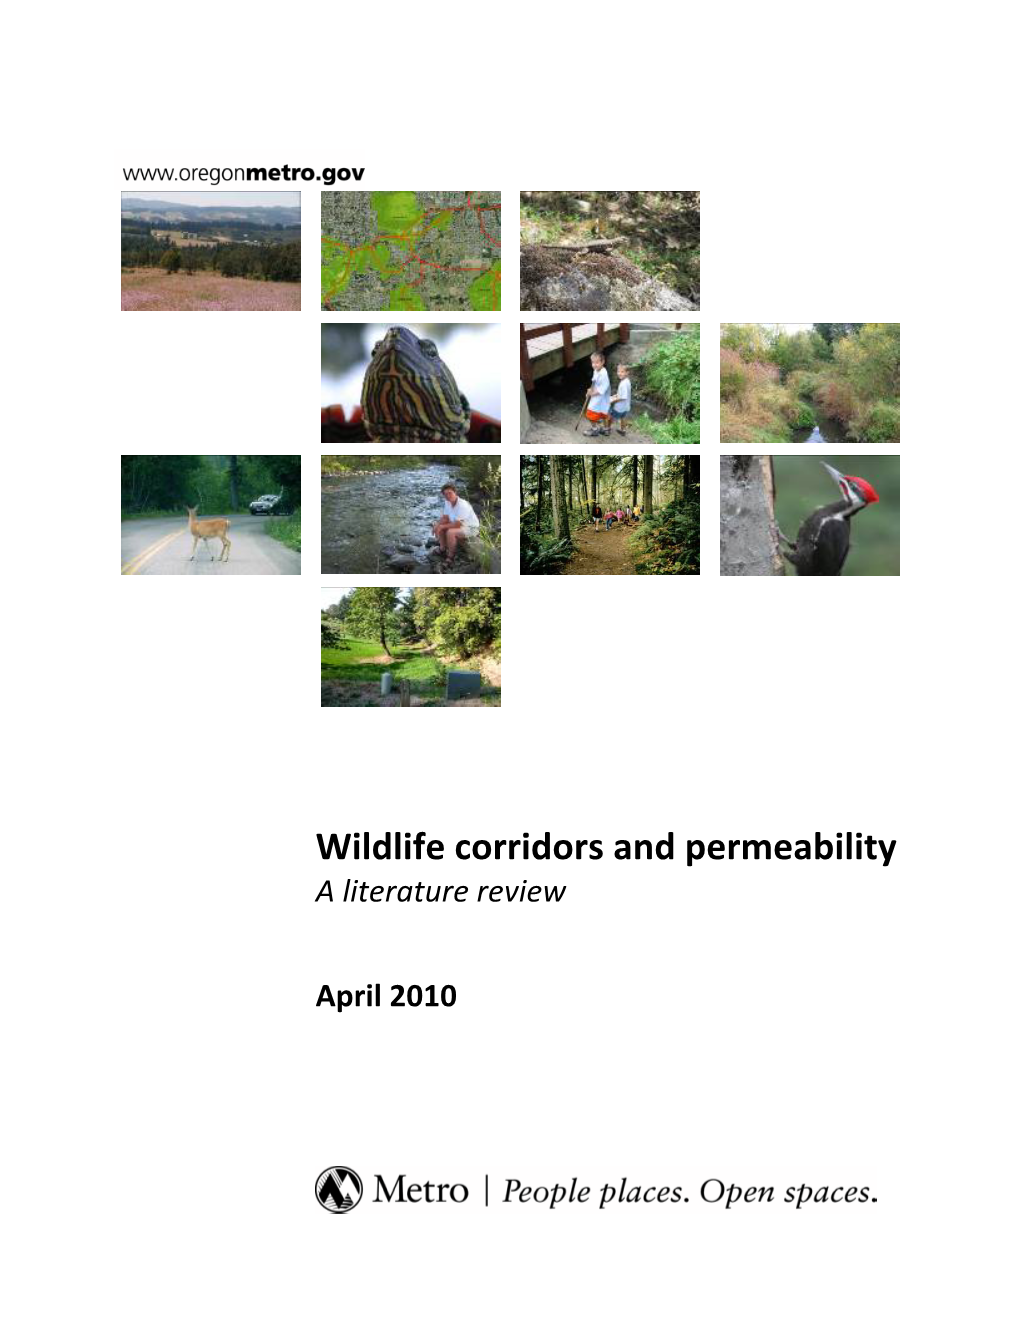 Wildlife Corridors and Permeability a Literature Review